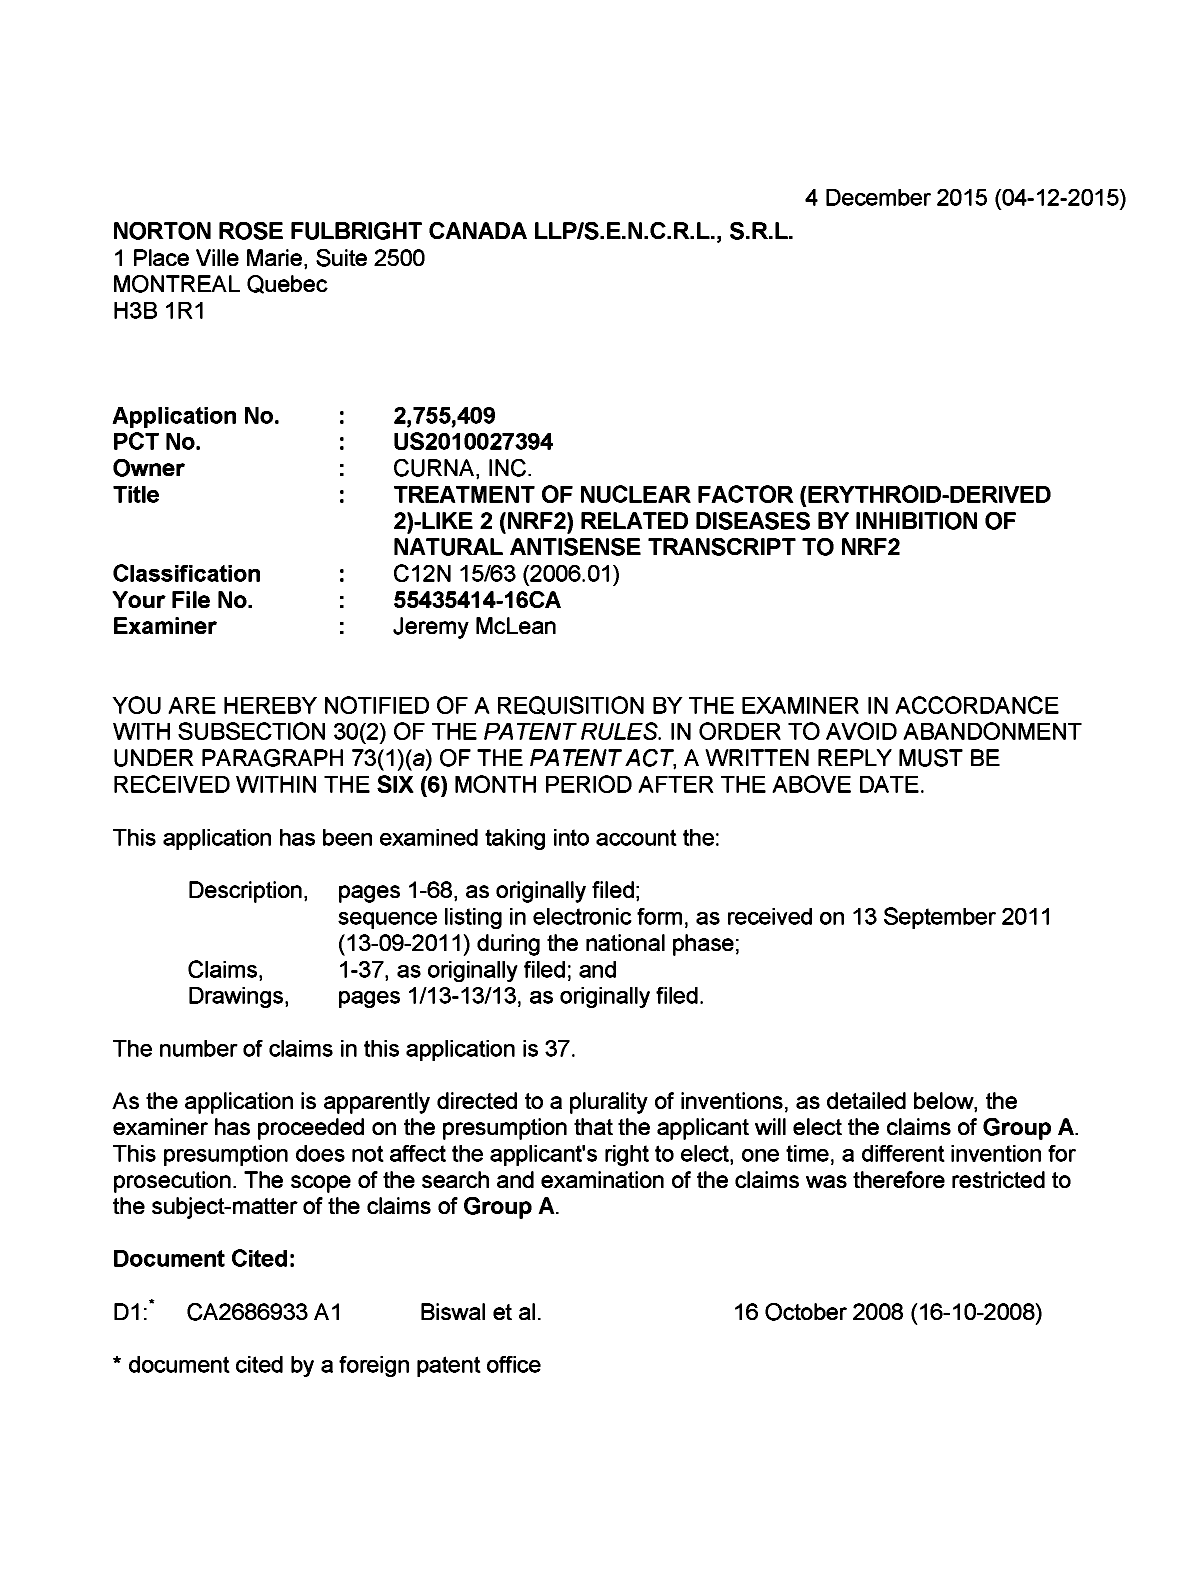 Canadian Patent Document 2755409. Examiner Requisition 20151204. Image 1 of 6